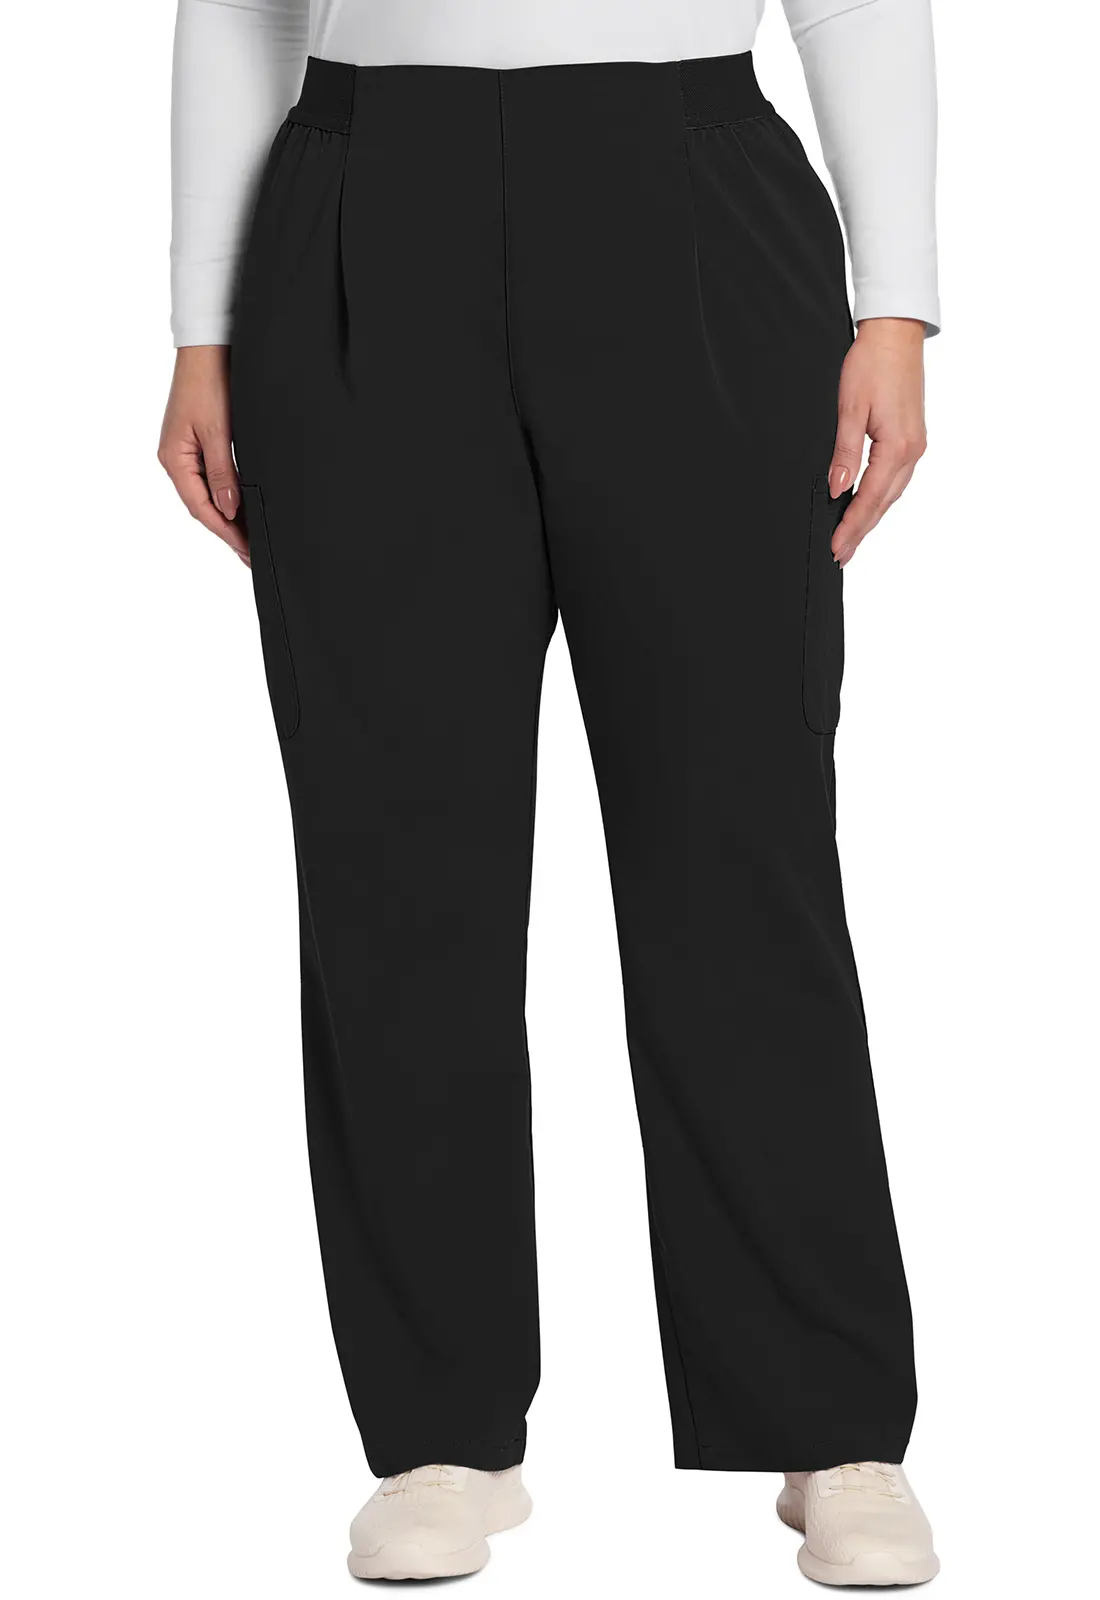 Mid Rise Pull-On Moderate Flare Leg Pant-Cherokee Uniforms